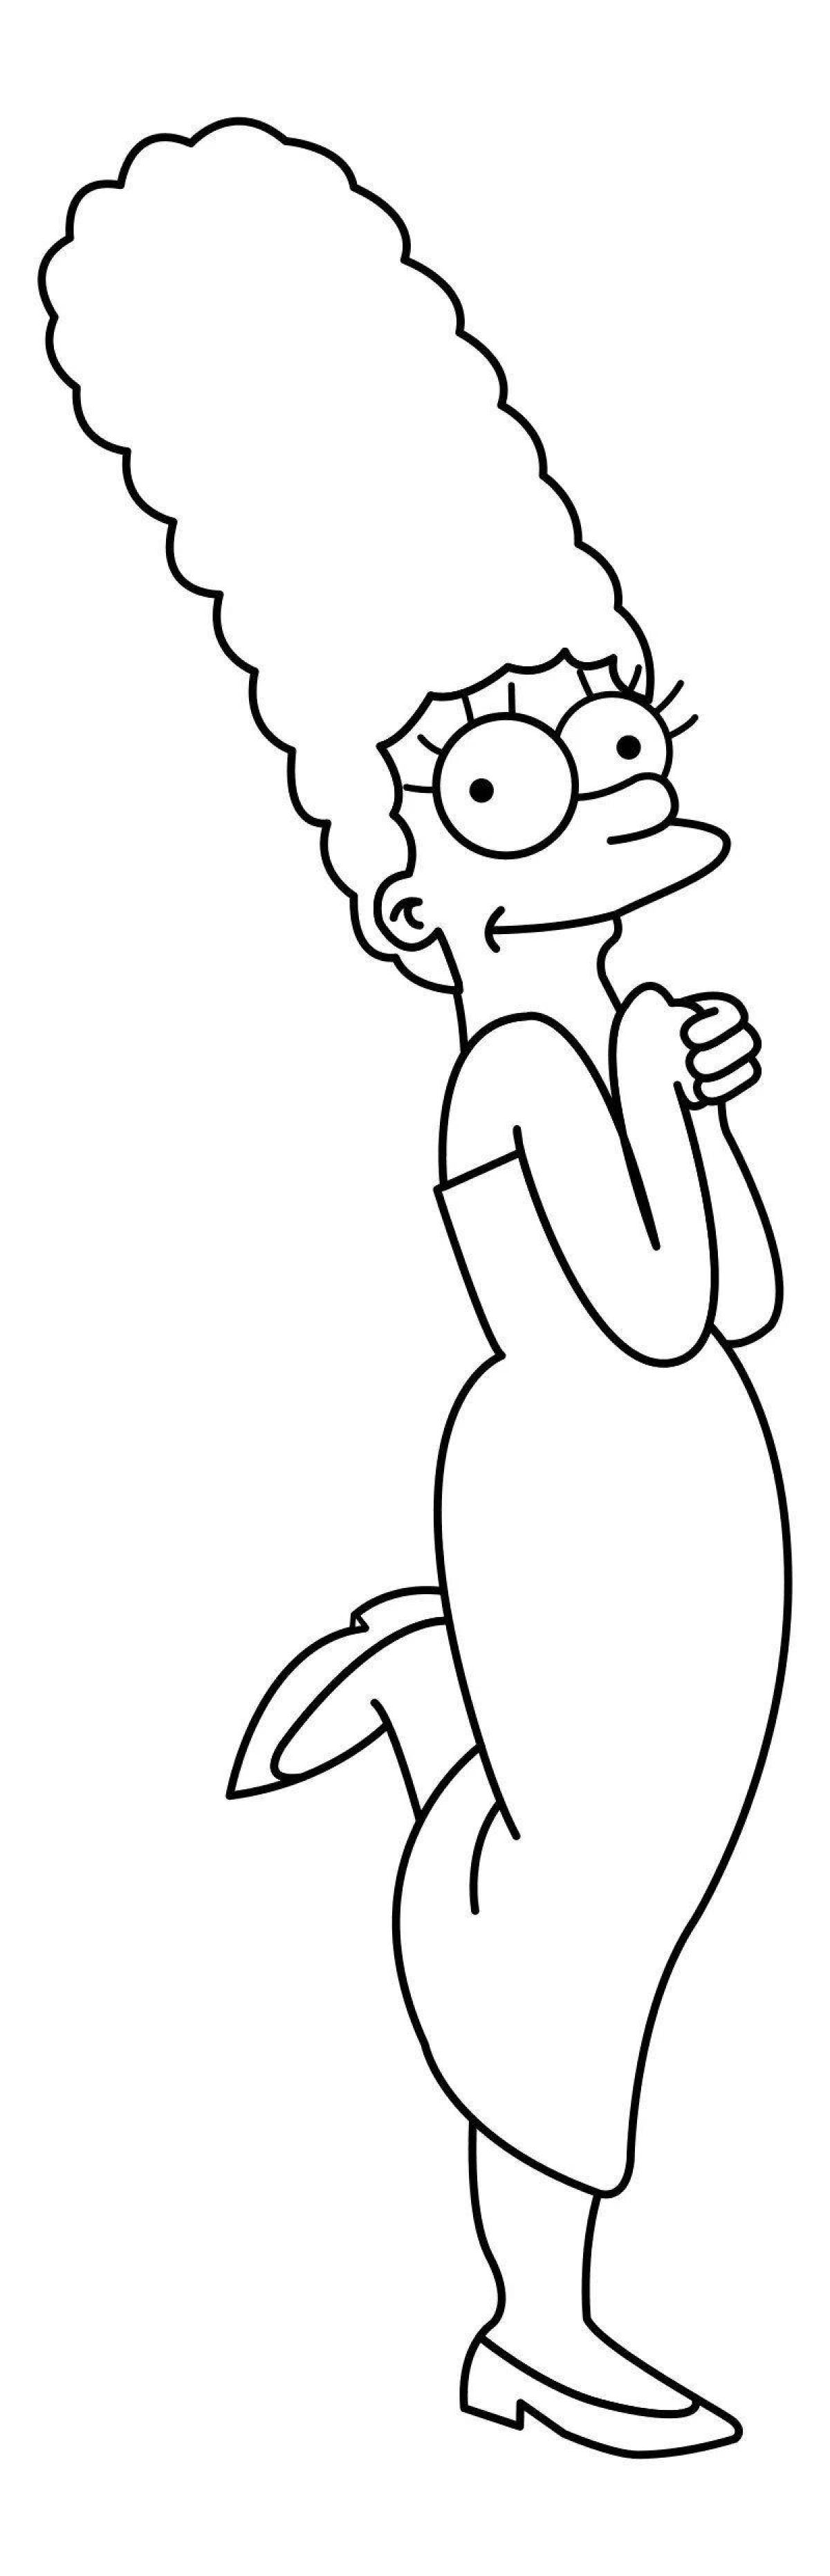 Marge simpson colorful coloring page